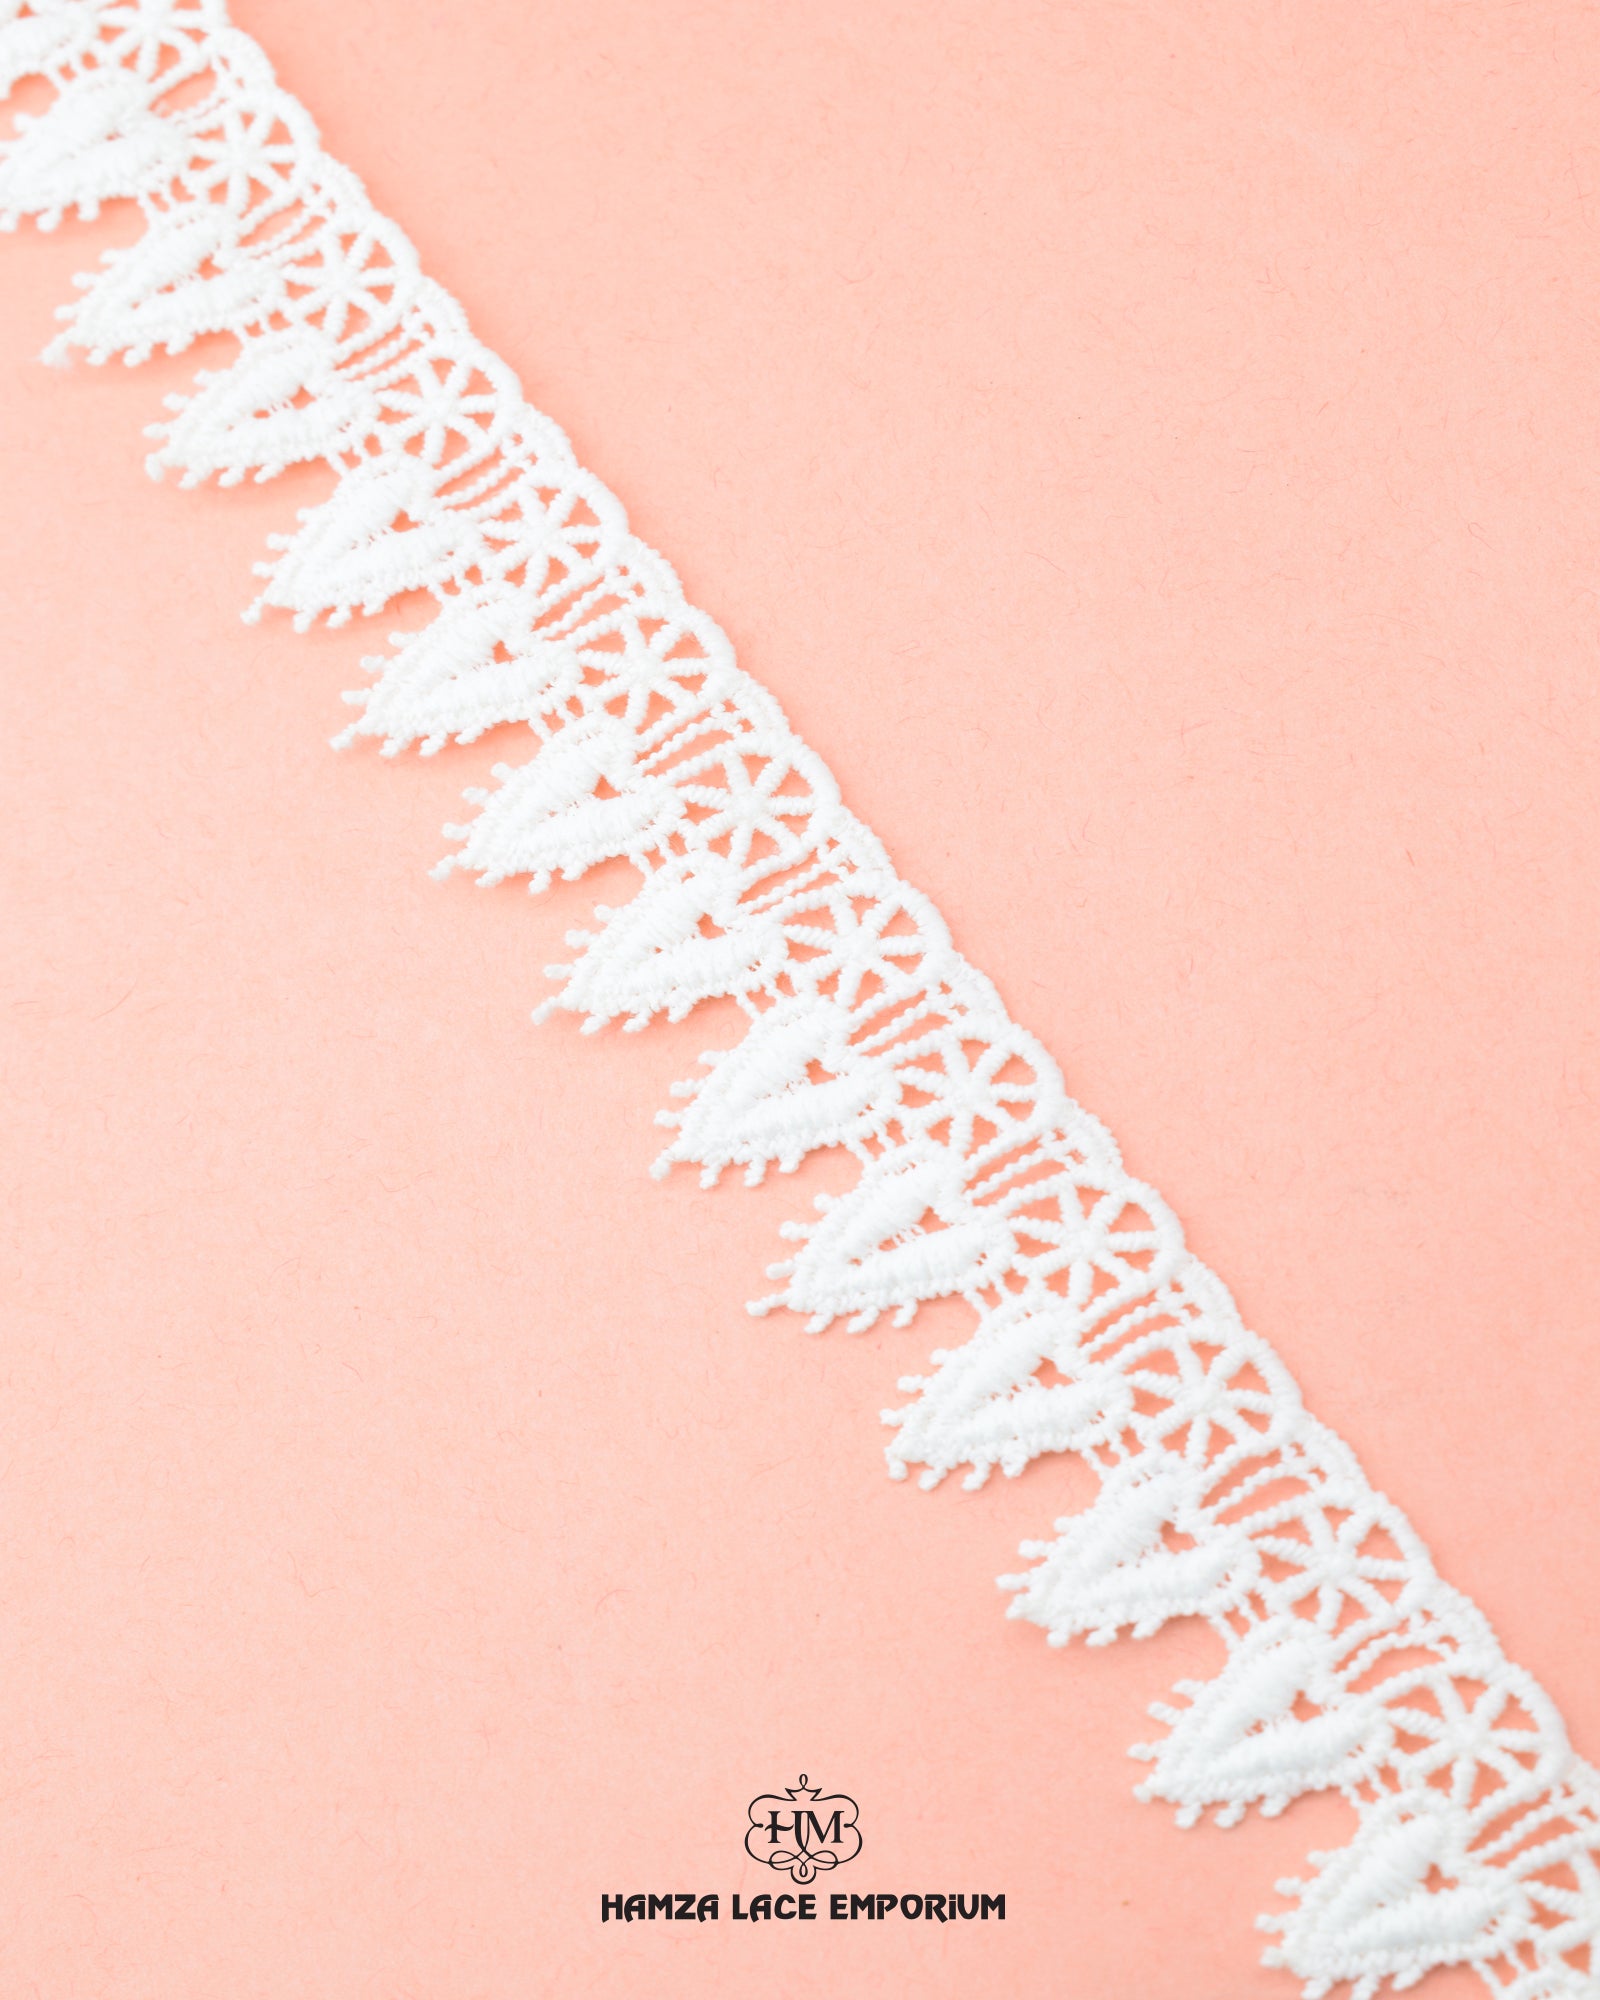 'Edging Lace 23443' with the brand name 'Hamza Lace' at the bottom